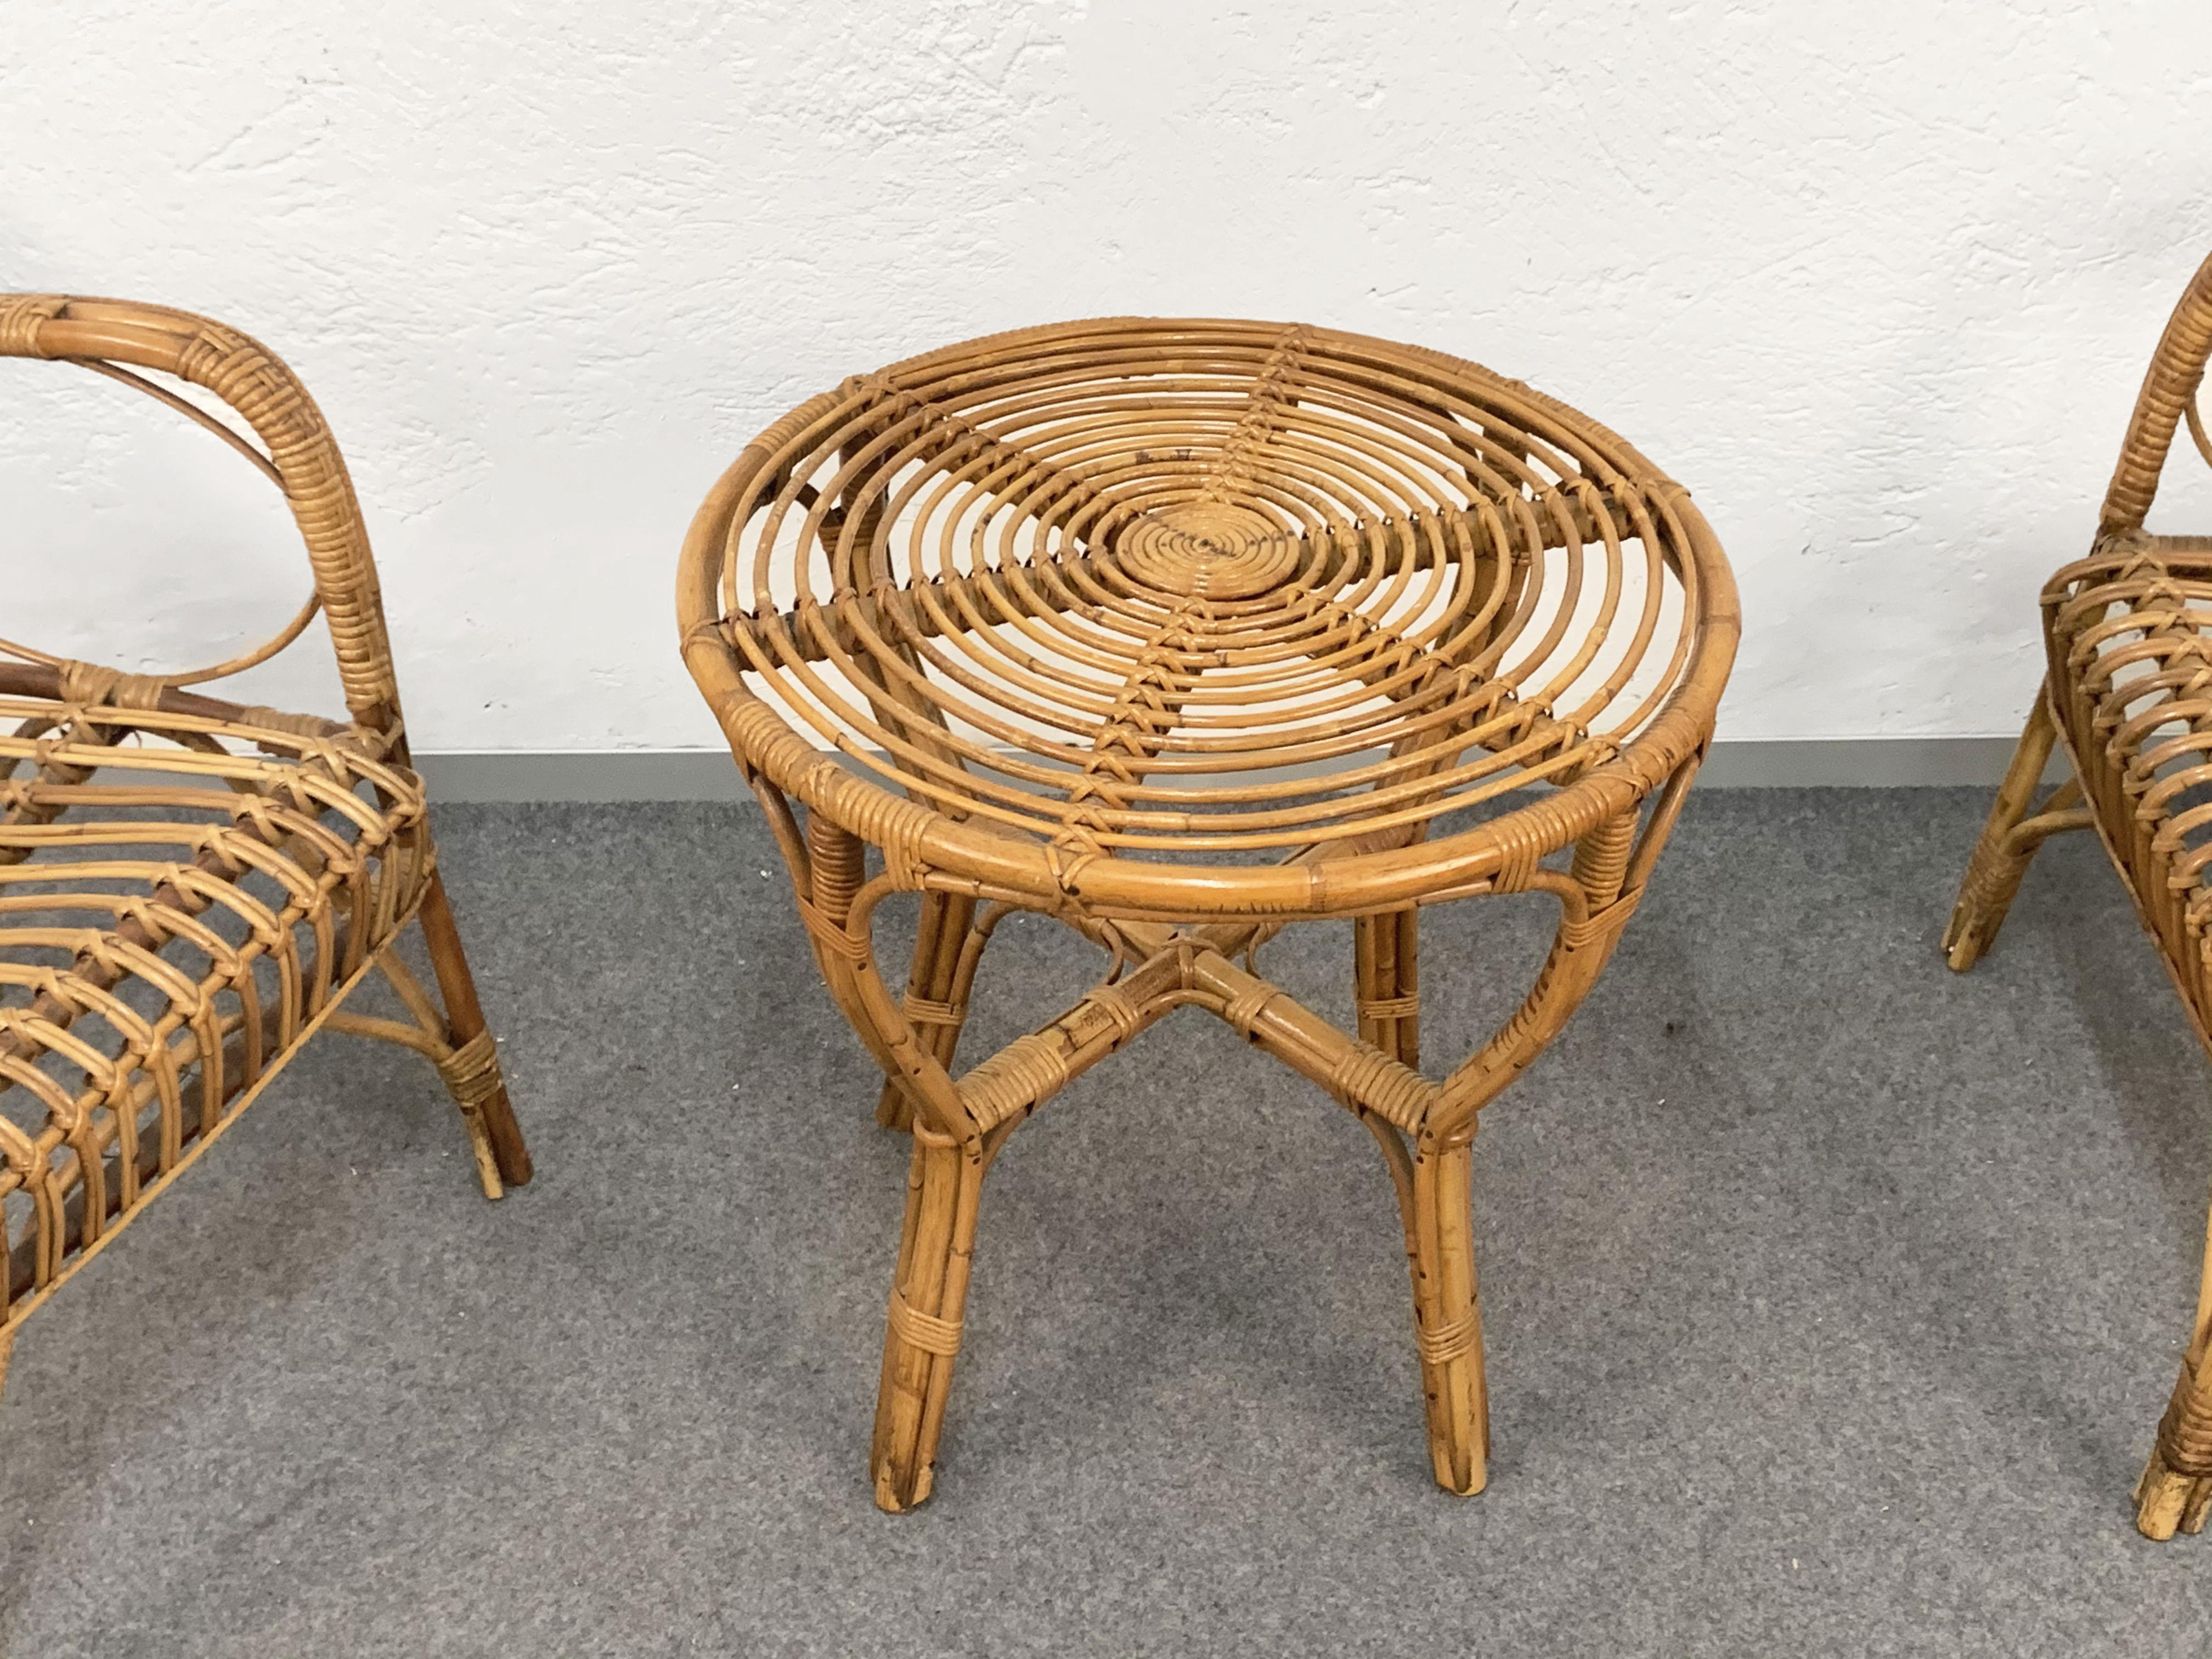 Midcentury Rattan and Bamboo Sofa, Armchairs and Italian Coffee Table, 1960s For Sale 11